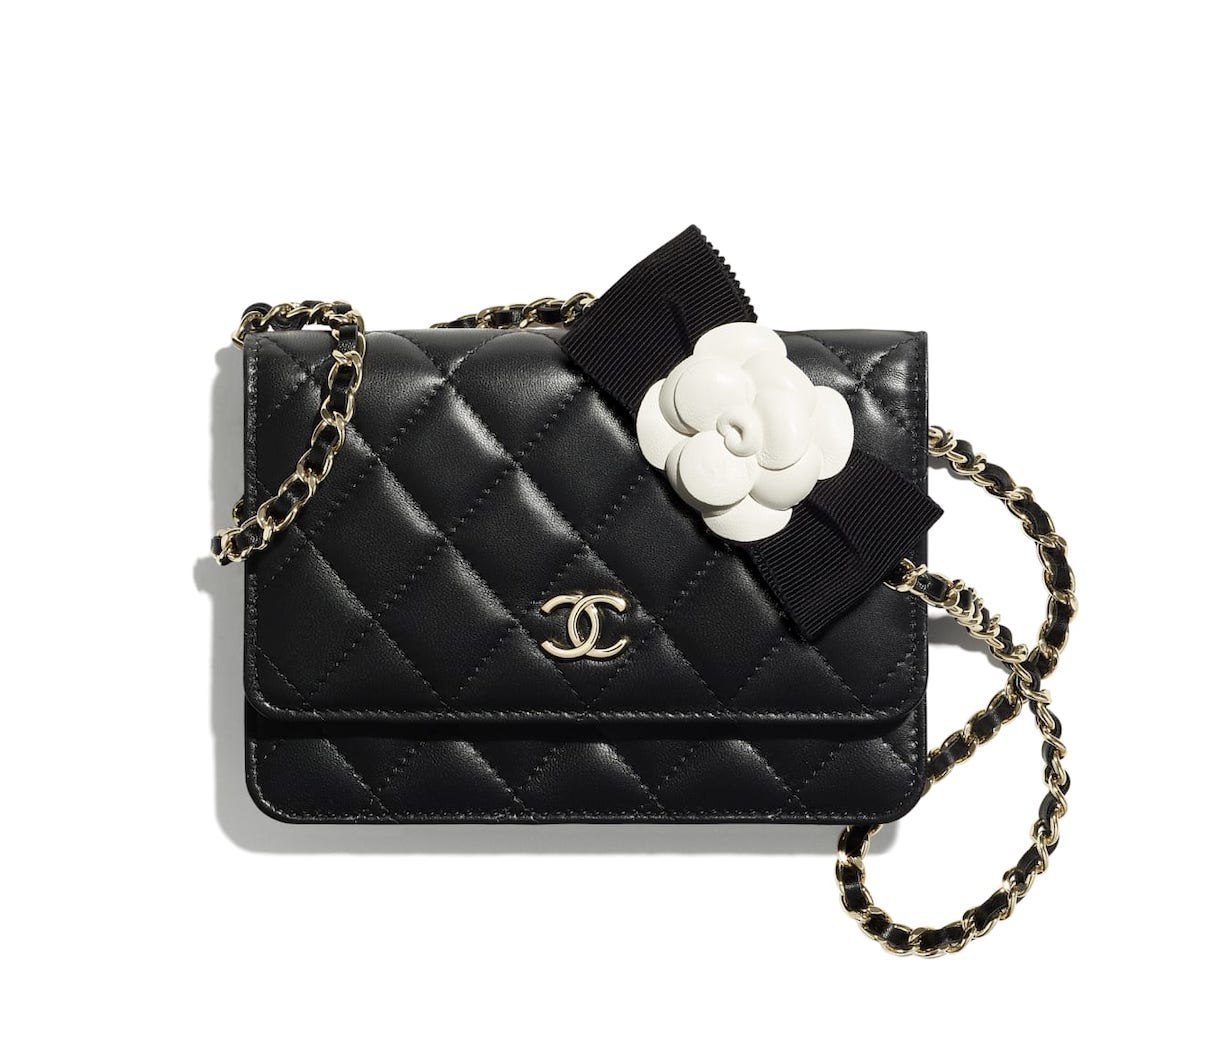 Special Edition of Chanel WOC (Wallet On Chain) in 2021 – Coco Approved  Studio